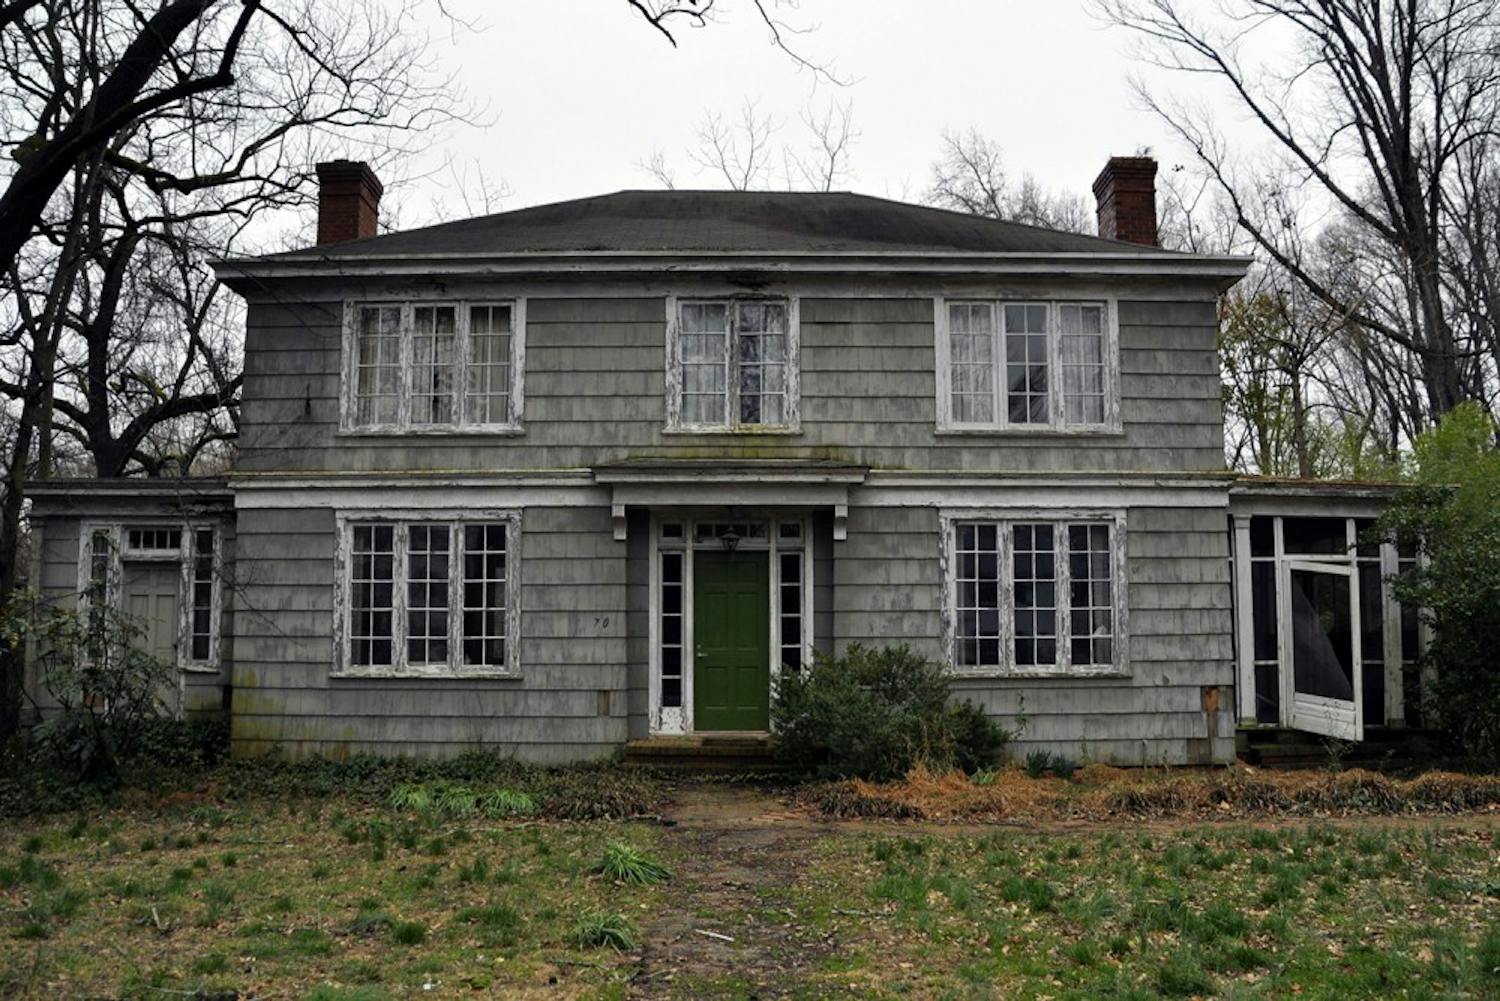 A local couple has requested permission to tear down this historic house, located at 704 Gimghoul Road, to build a new one in its place.